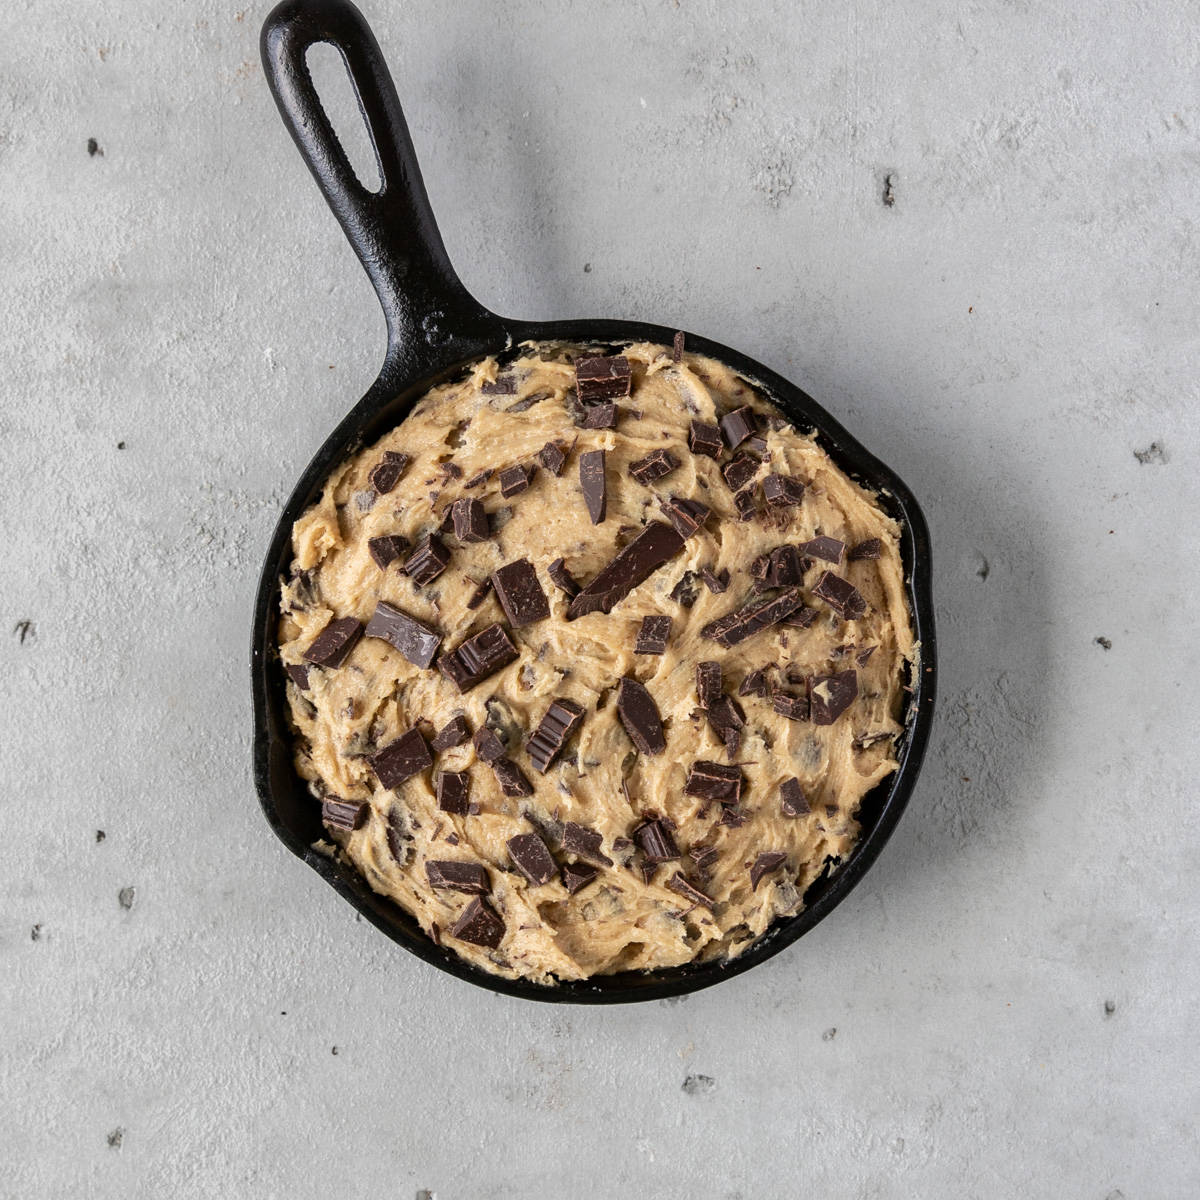 the cookie in a skillet before being baked.